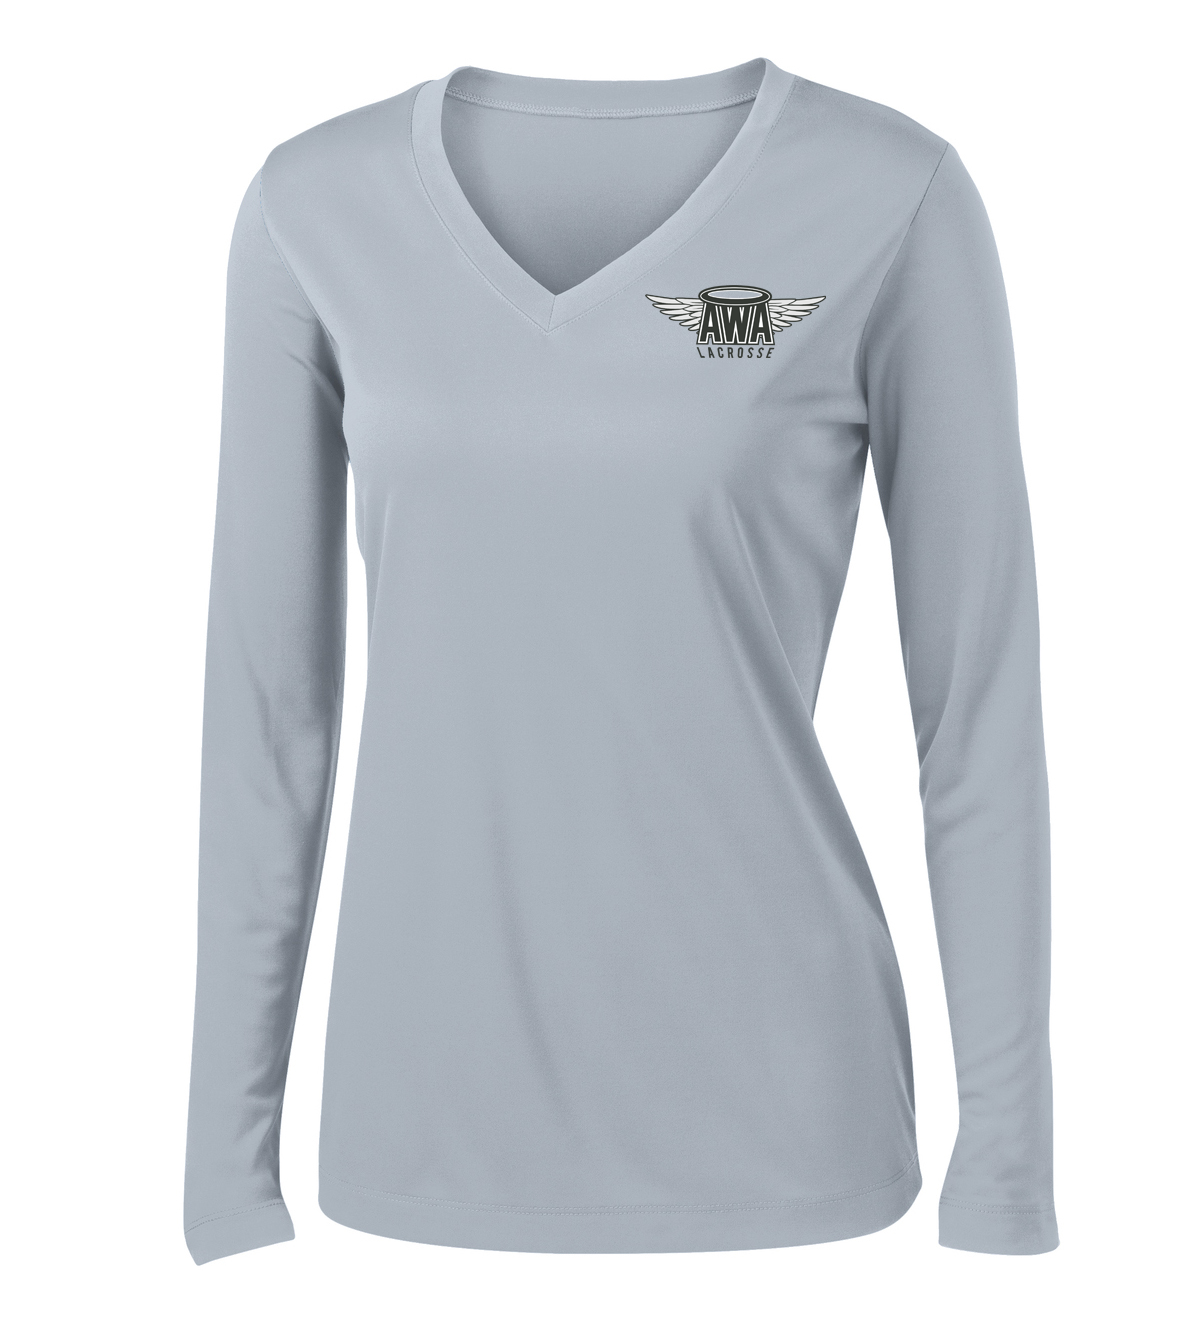 Angels With Attitude  Women's Long Sleeve Performance Shirt